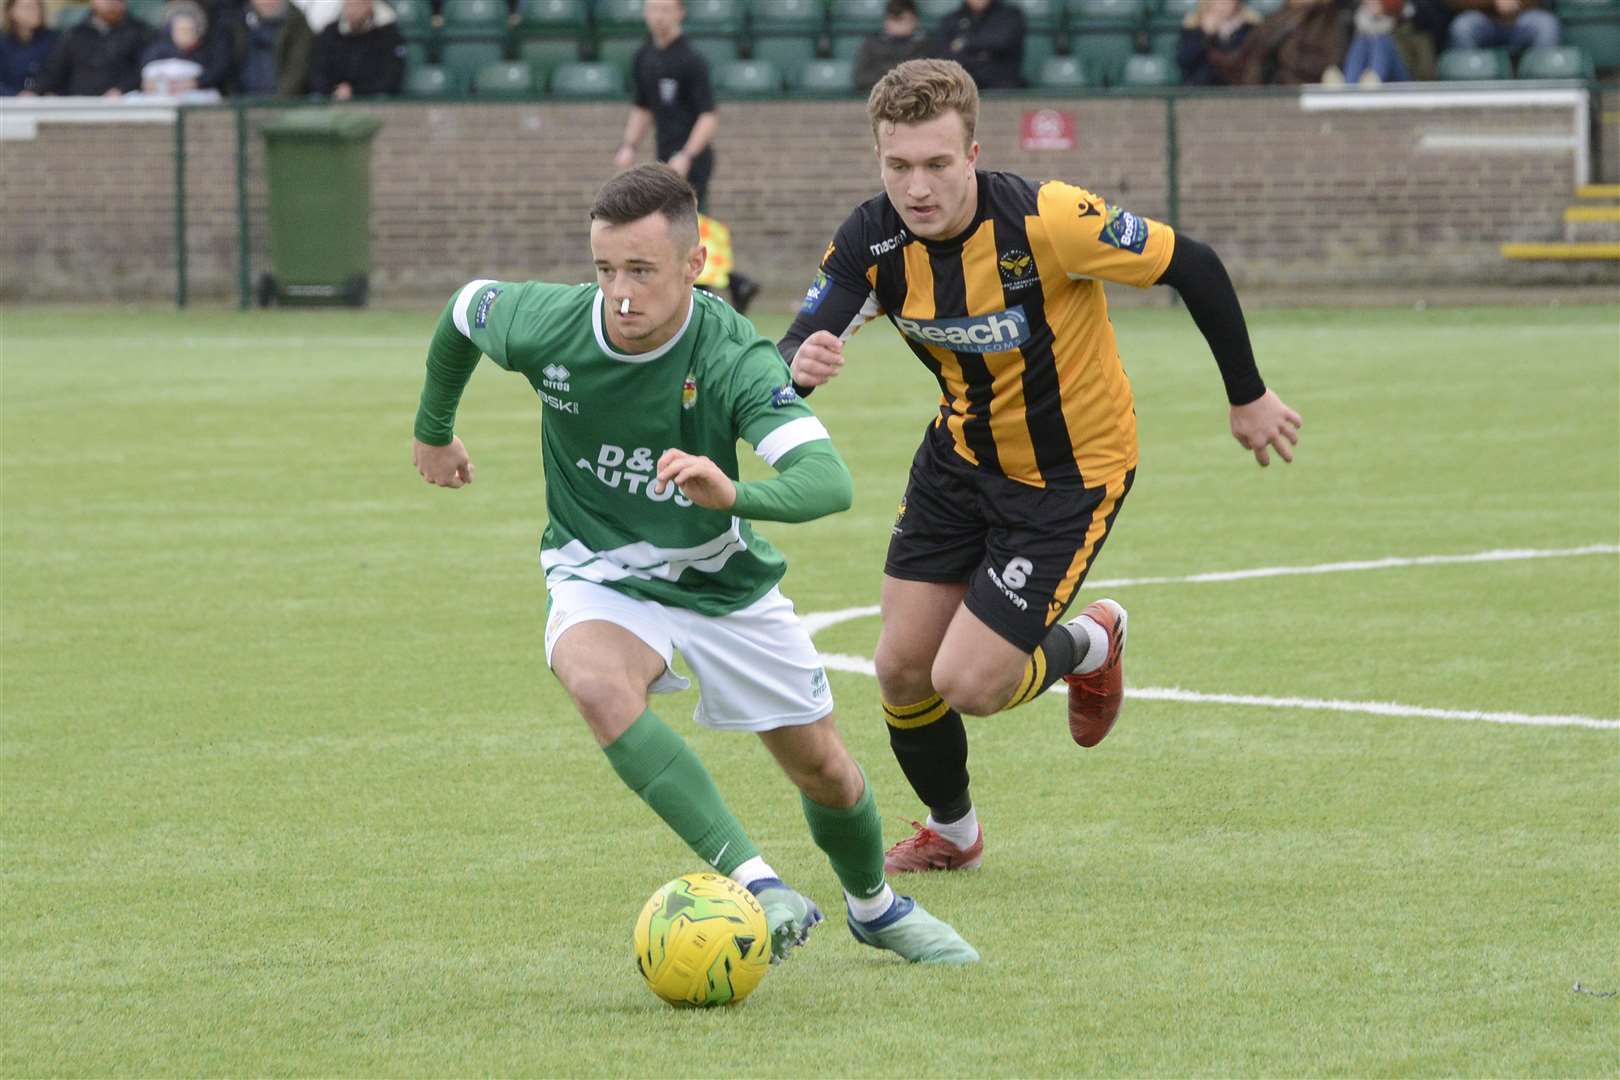 Danny Parish on the ball for Ashford Picture: Paul Amos